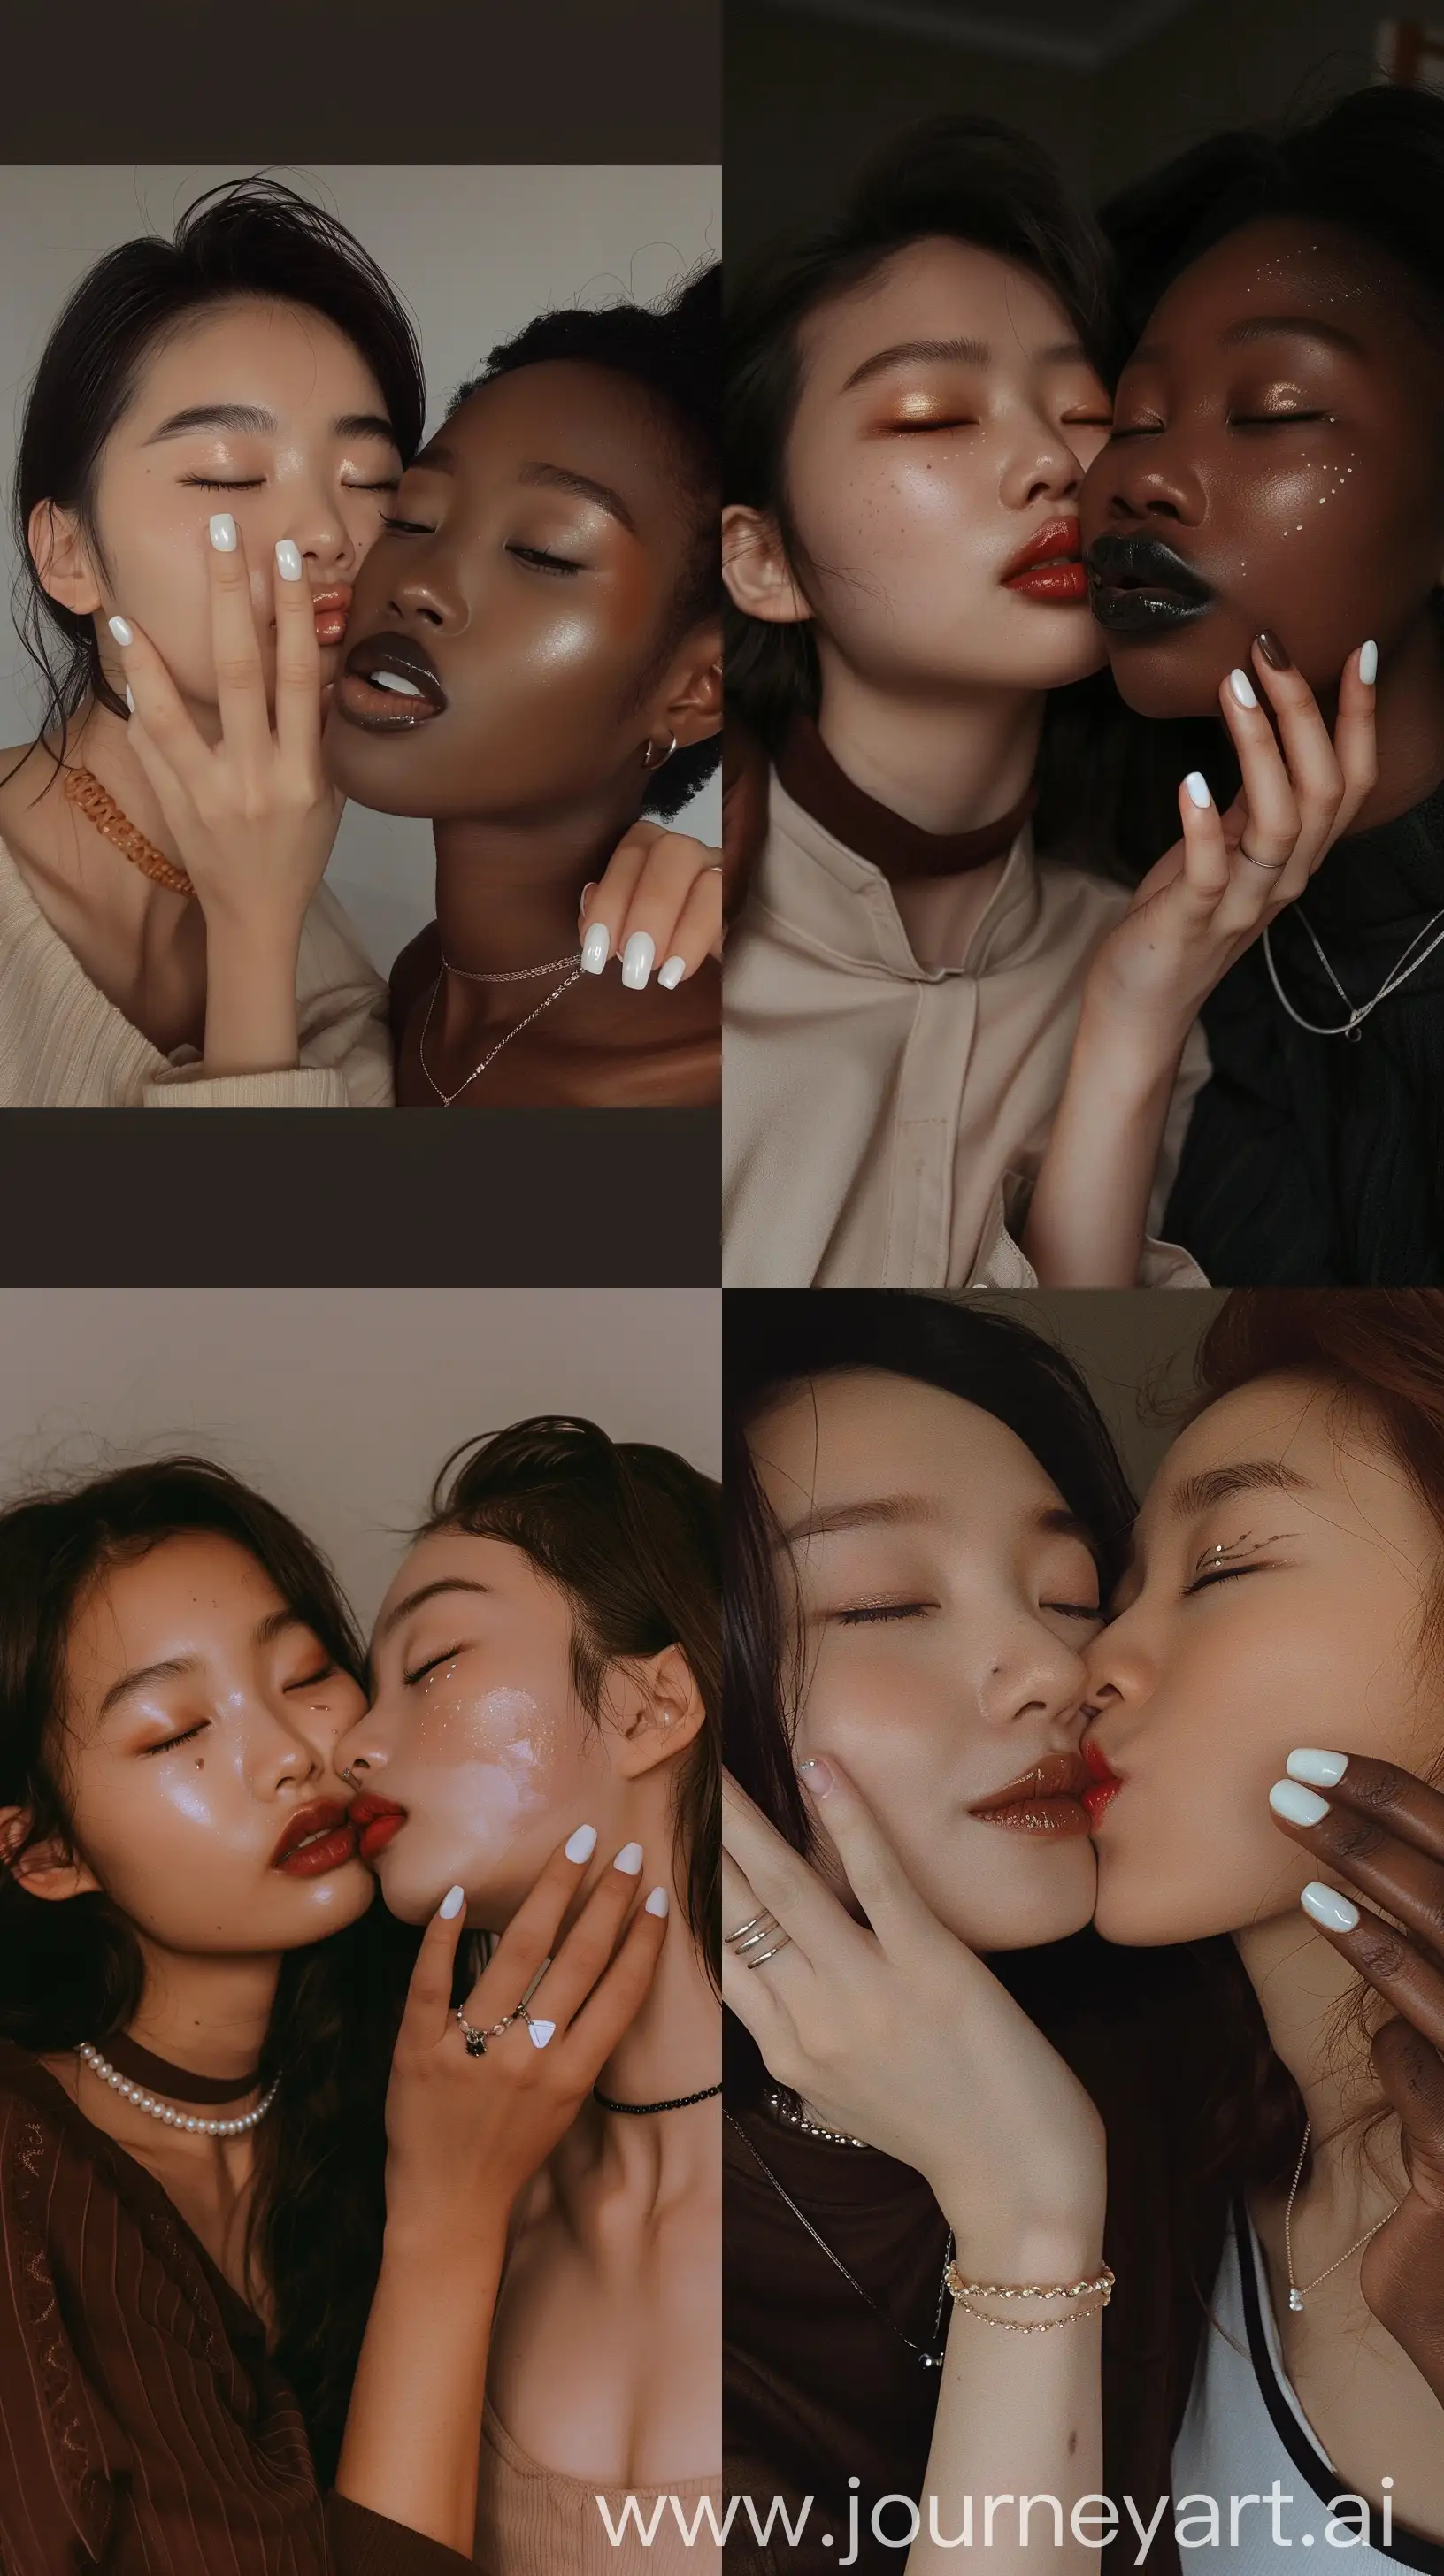 A good looking teenage girl couple, two girls, one Korean girl, one black girl, kissing cheek, 18, selfie, wearing simple clothes, dark warm tones, brown aesthetic make up, cute, wearing stylish necklac, one hand on the others face, white gel nail polish --ar 9:16